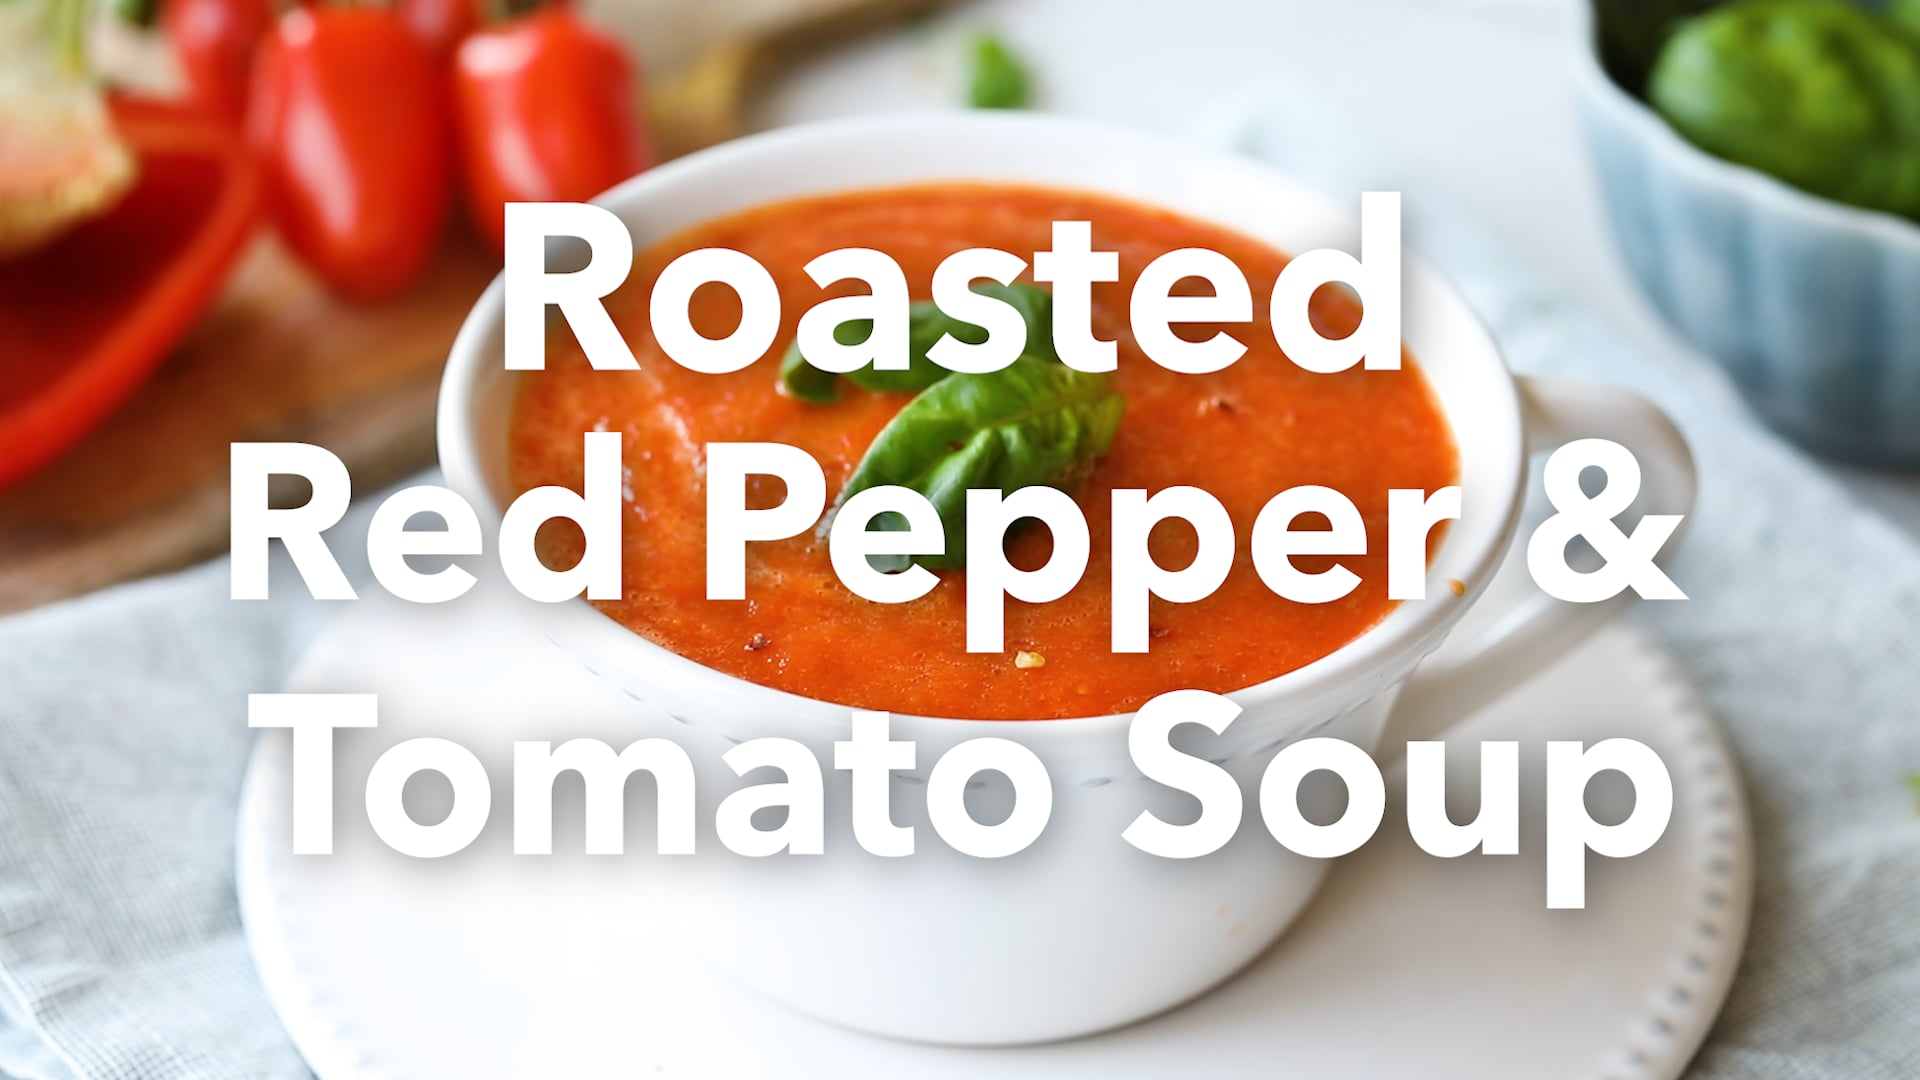 Roasted Red Pepper and Tomato Soup on Vimeo